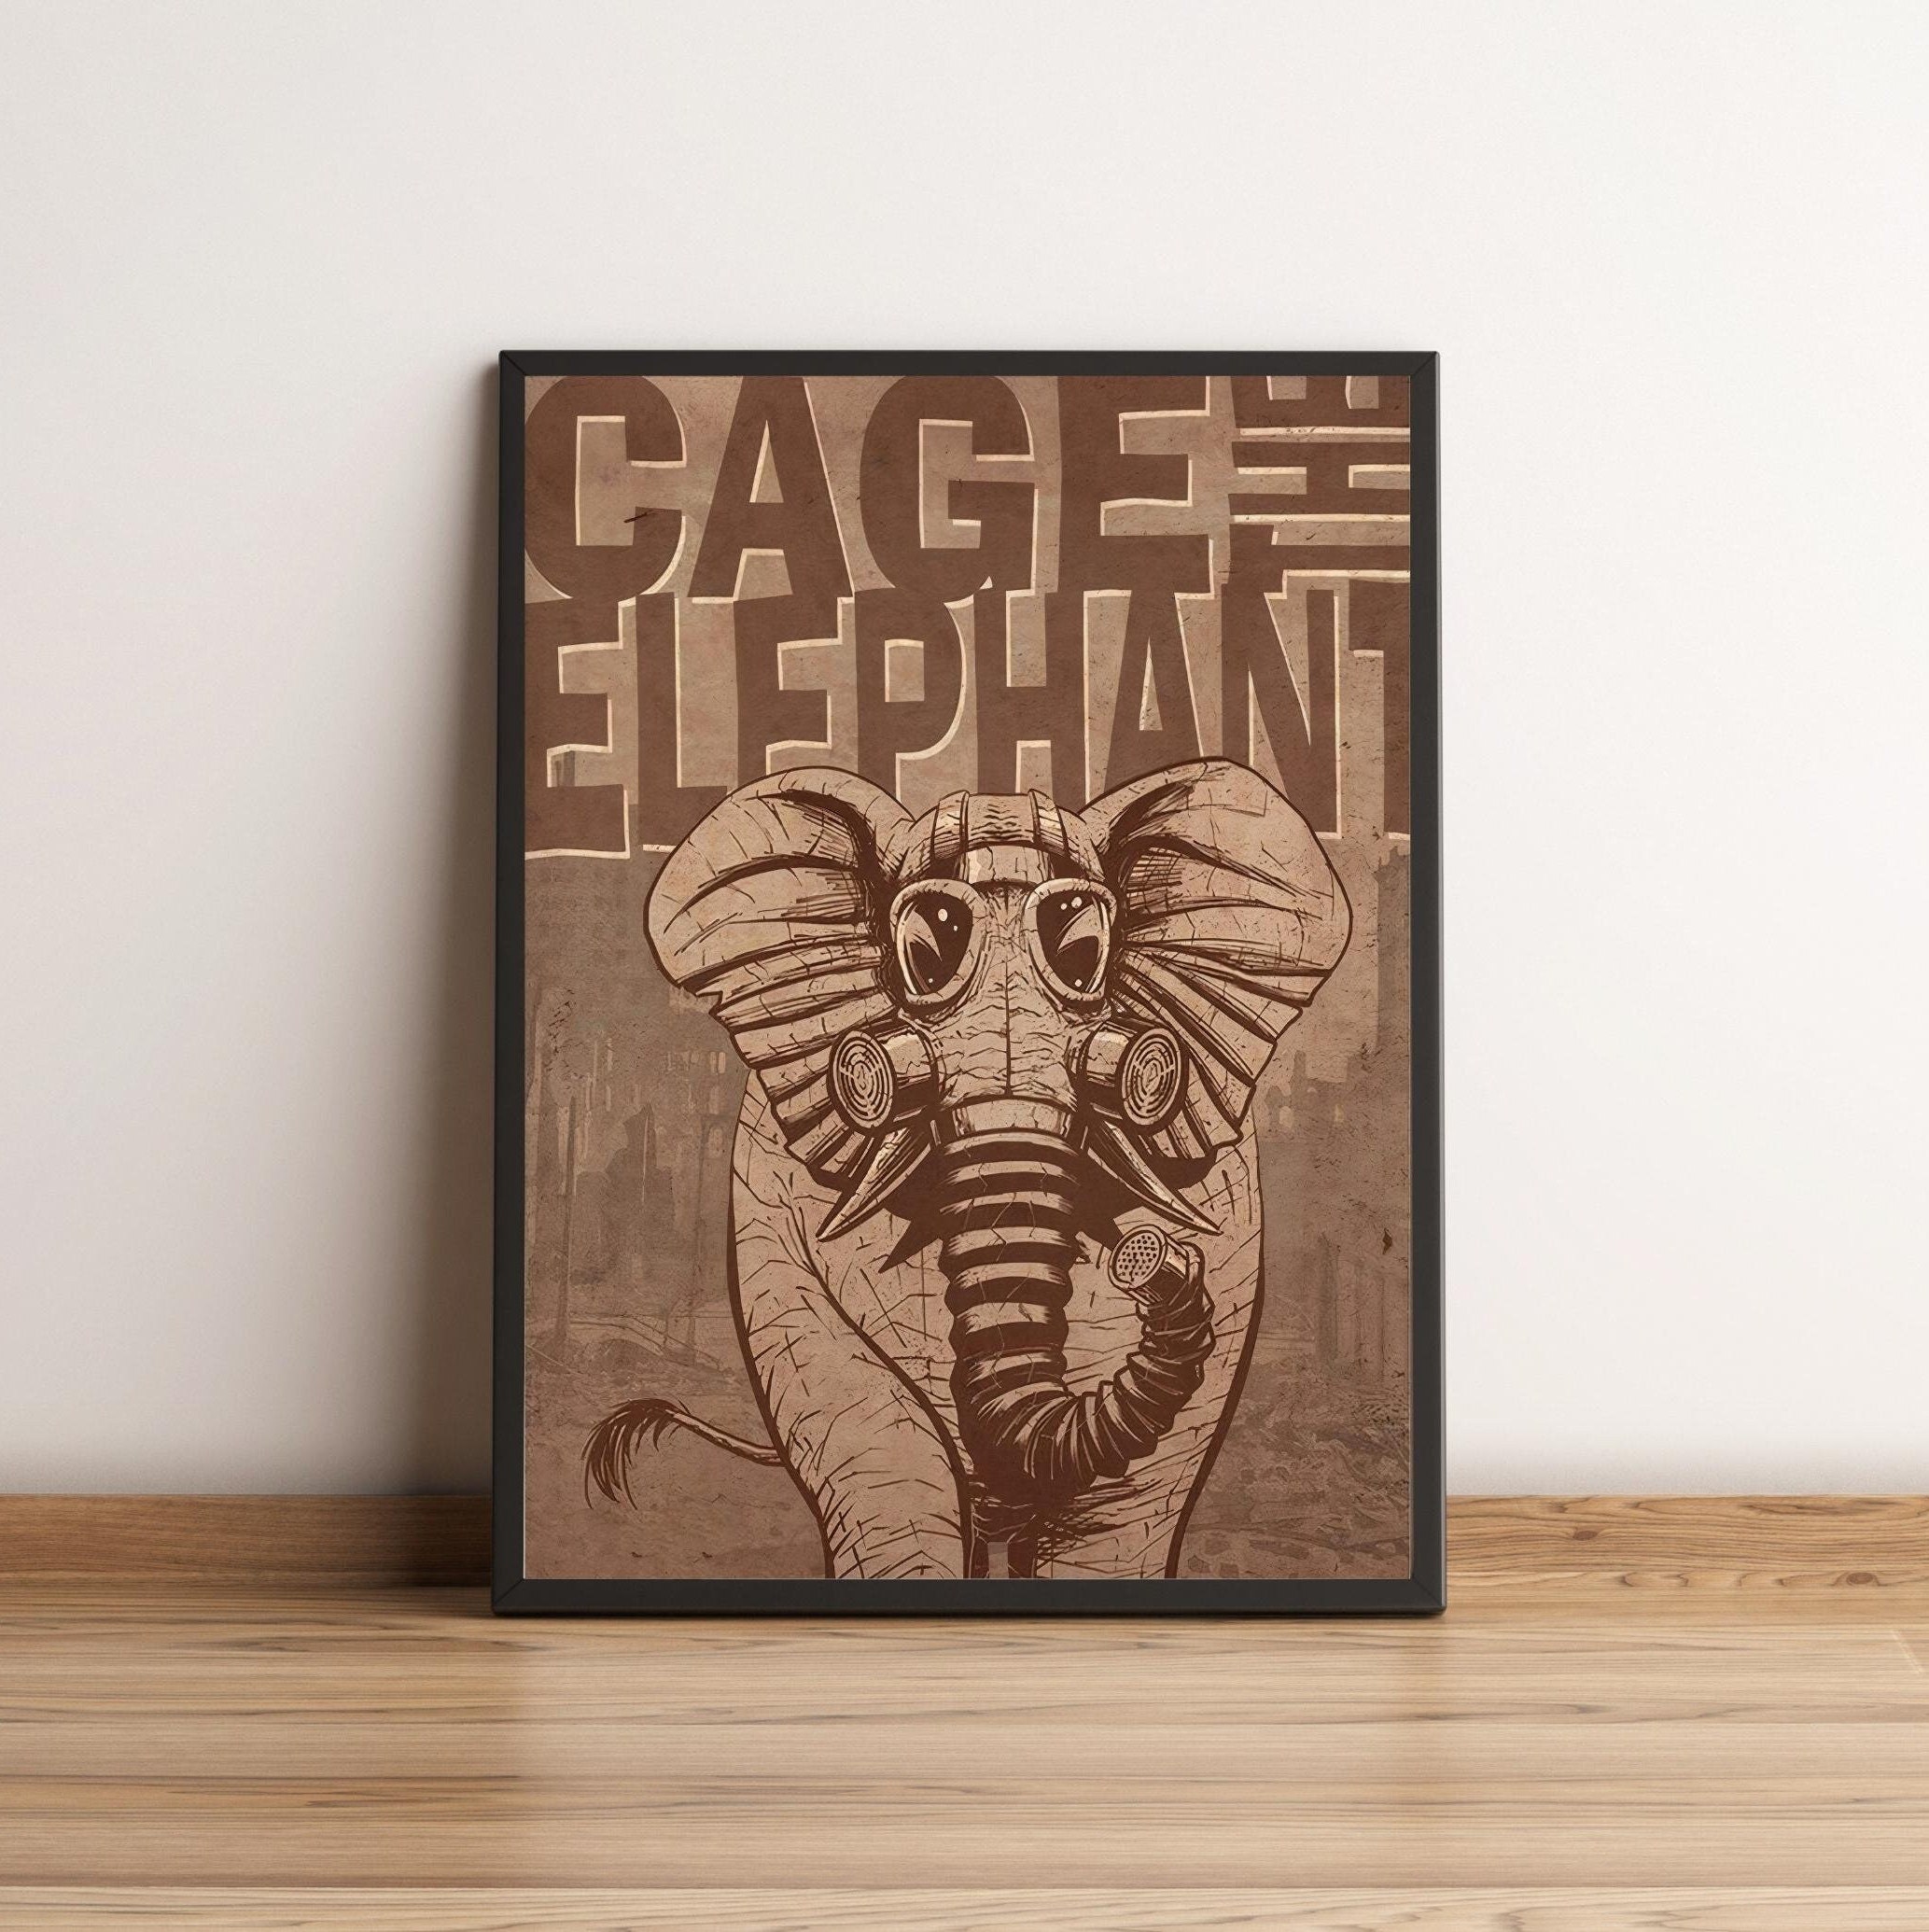 Lyrics to halo by cage the elephant  Cage the elephant, Original quotes,  Quotes